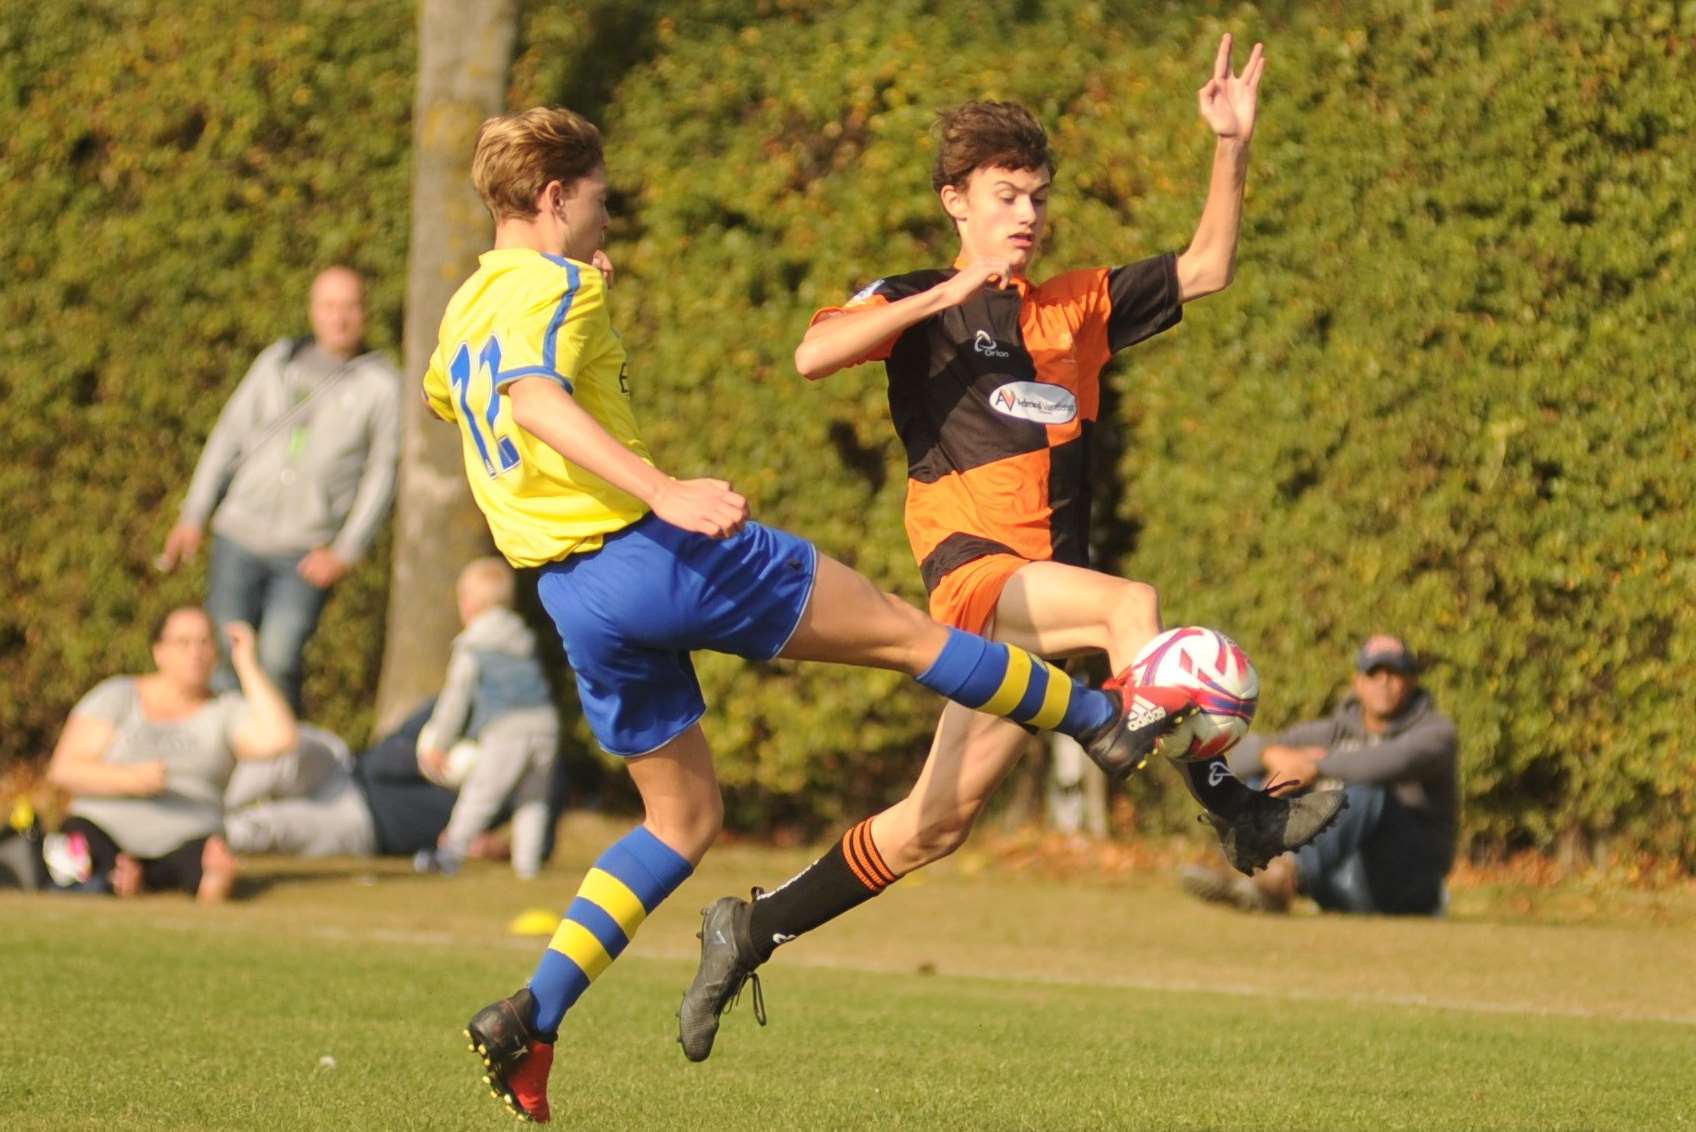 Pegasus 81 Flyers get stuck in against Strood 87 in Under-15 Division 2 Picture: Steve Crispe